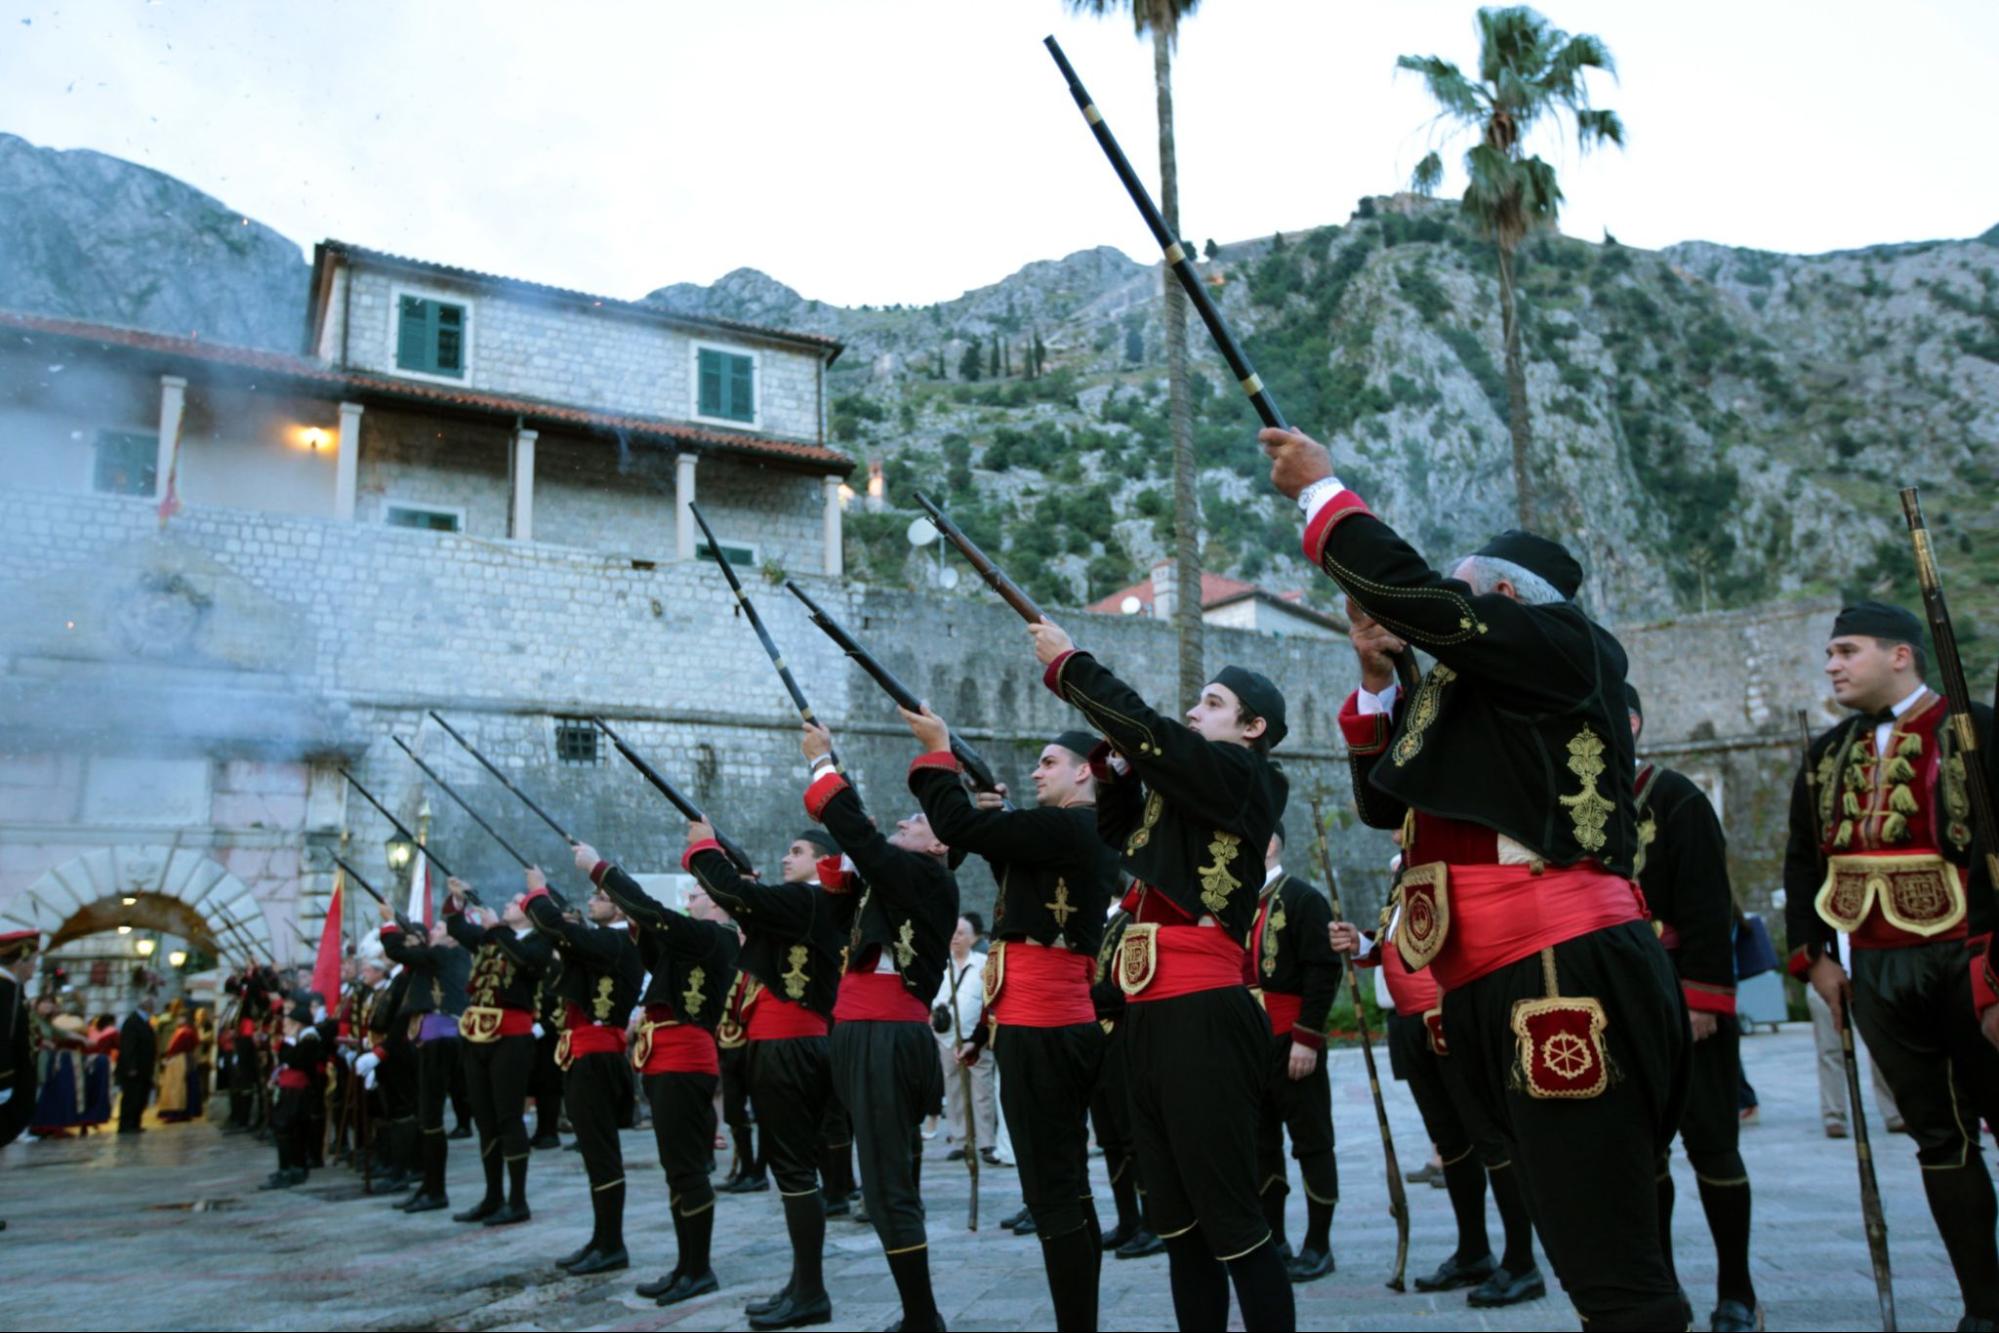 A guild during a festival in the old town of Kotor in the inner Bay of Kotor in Montenegro in the Mediterranean in Europe